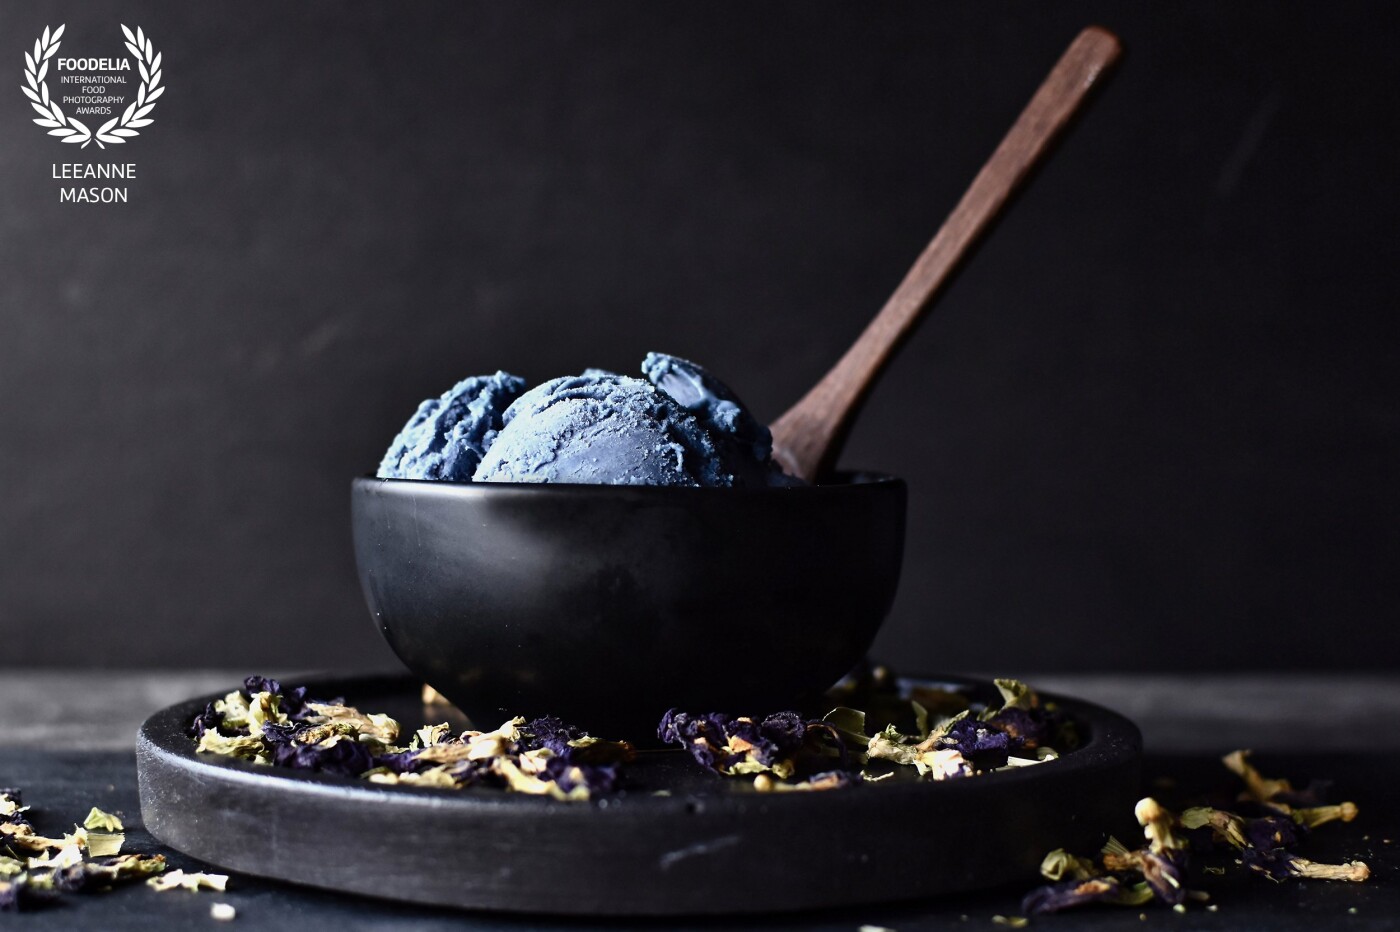 This is my homemade Blue Matcha Ice Cream.  I used dried Butterfly Pea Flowers, removed the stems, milled the flowers and created Blue Matcha powder to use in the recipe.  It has a very different taste and there is something satisfying about creating something unique from scratch.  I scattered the Butterfly Pea Flowers in the scene and placed the spoon diagonally to draw the viewer to the bowl where the hero food sits.  This was shot with a very large aperture and natural light.